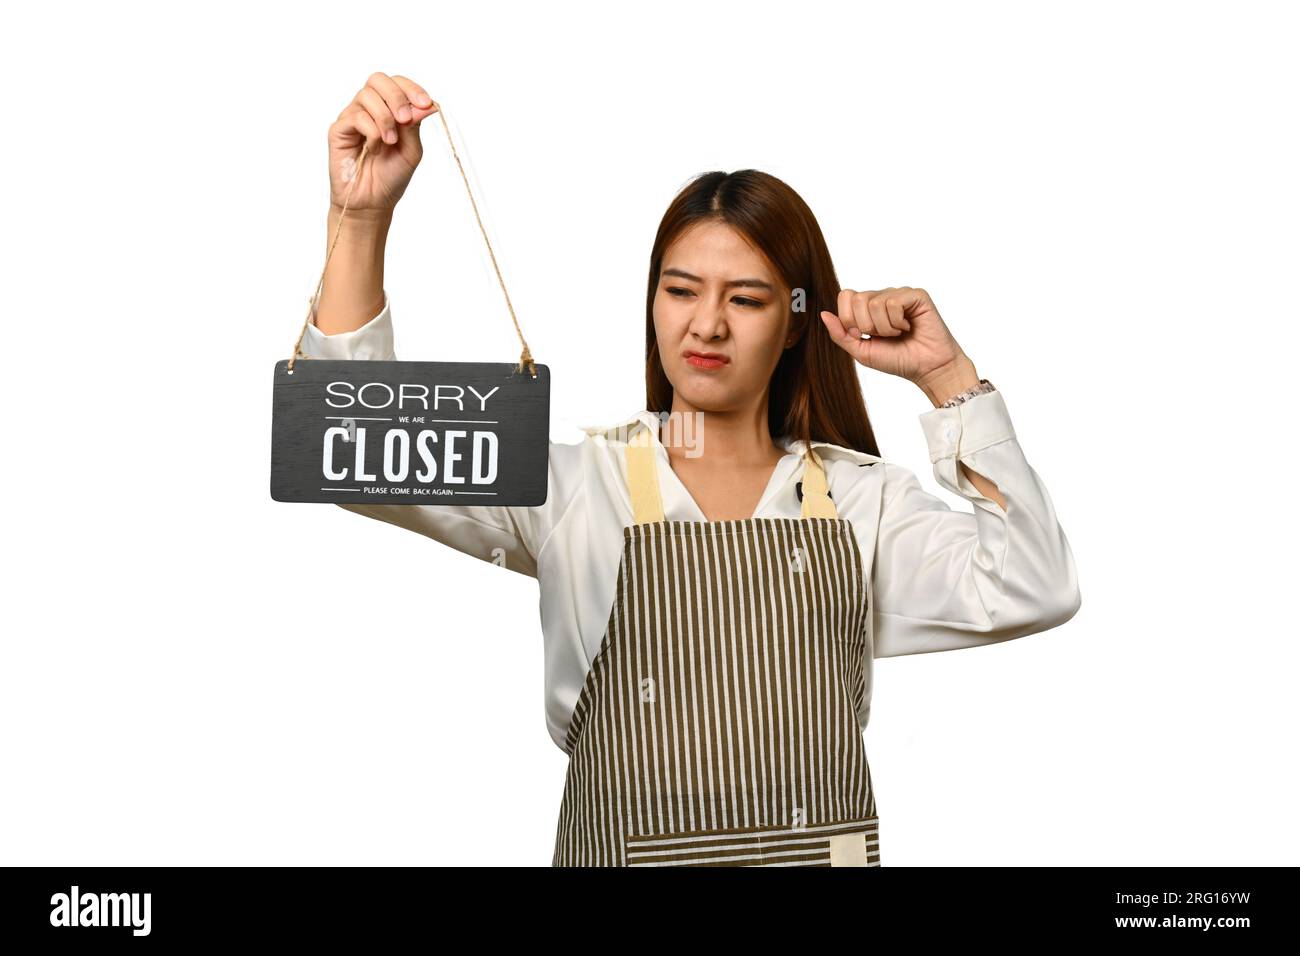 Young woman small business owner in apron holding closed sign isolated on white background Stock Photo